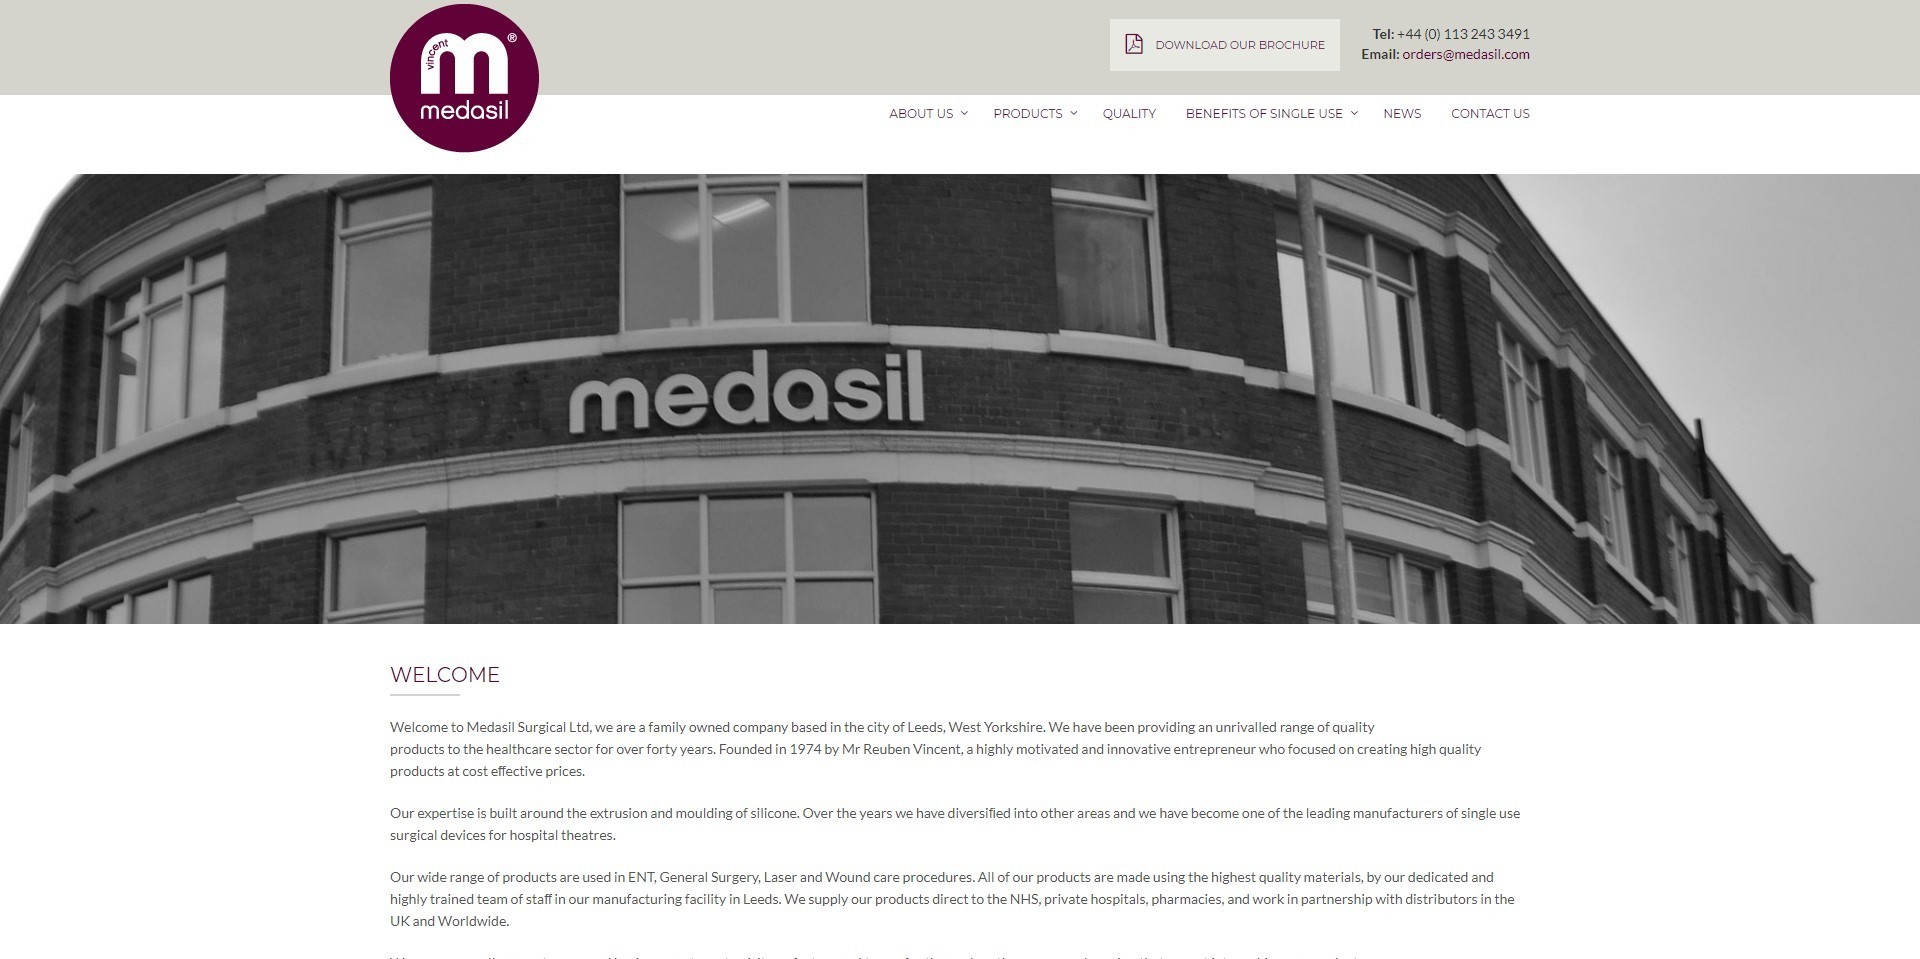 The previous Medasil, designed by it'seeze, website shown on desktop